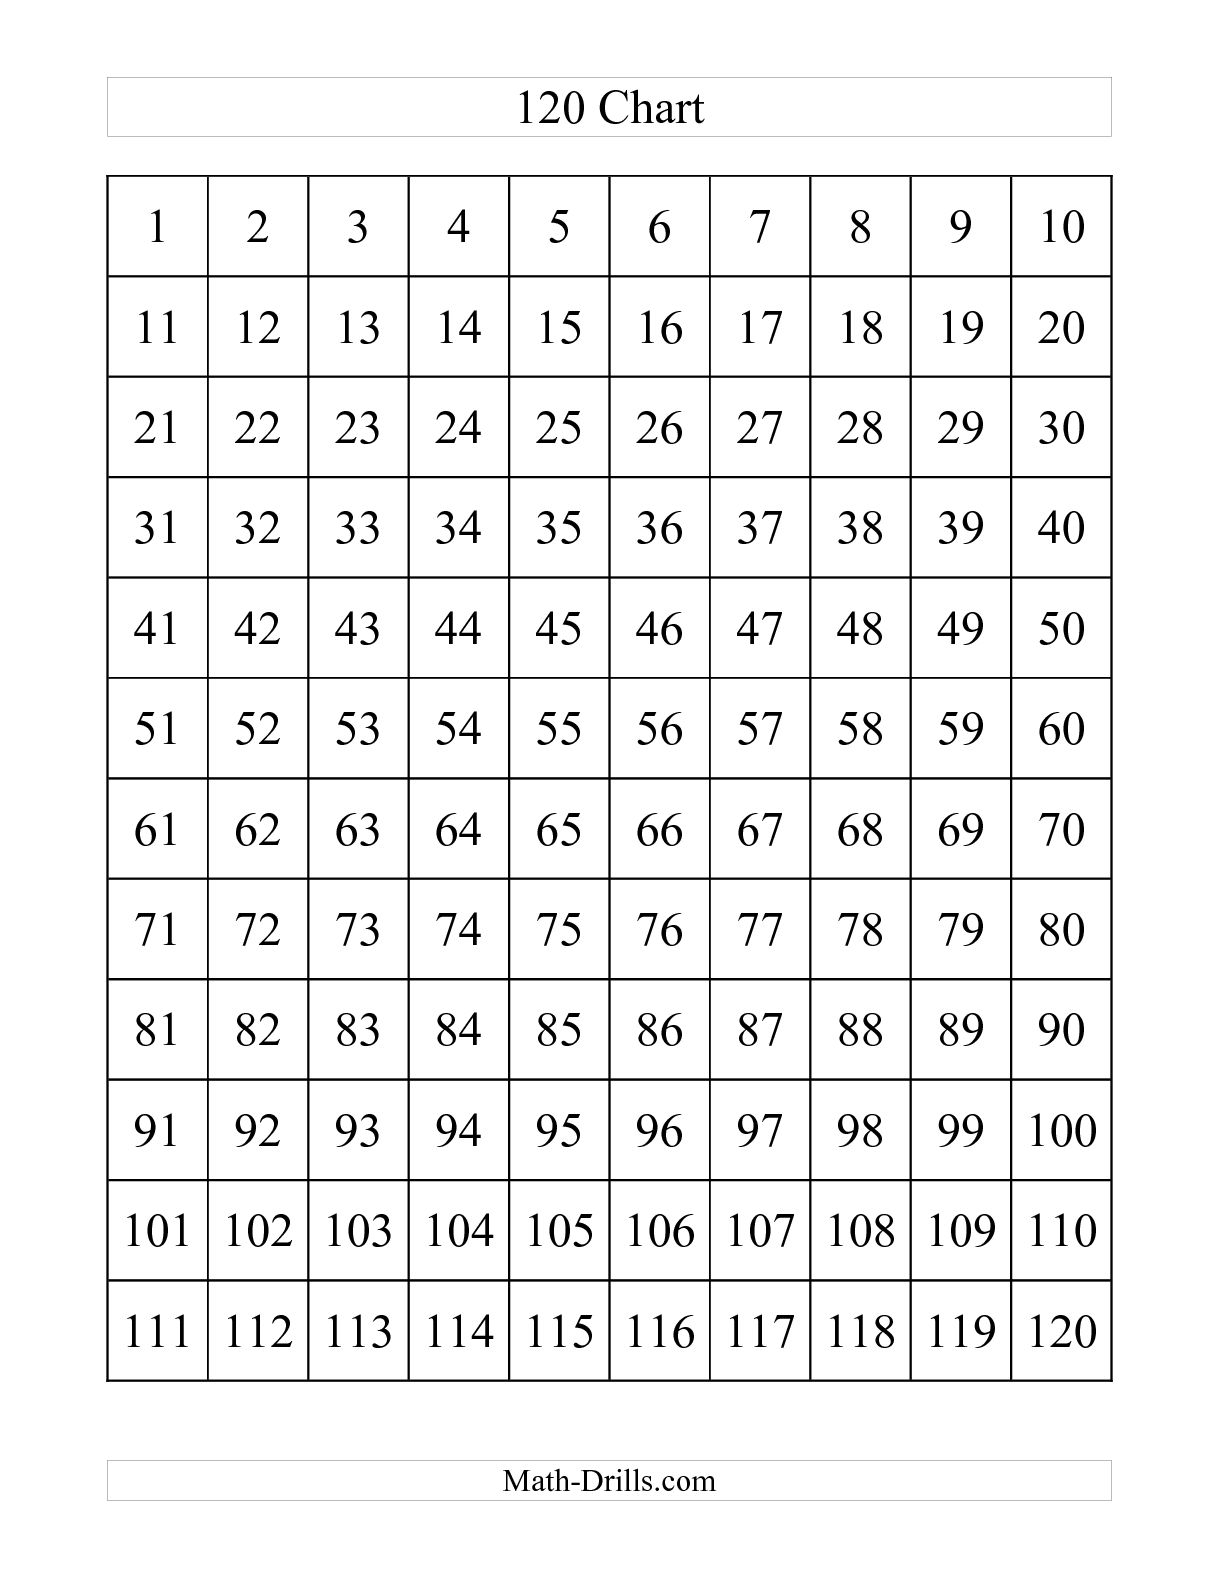 Number Printable Image Gallery Category